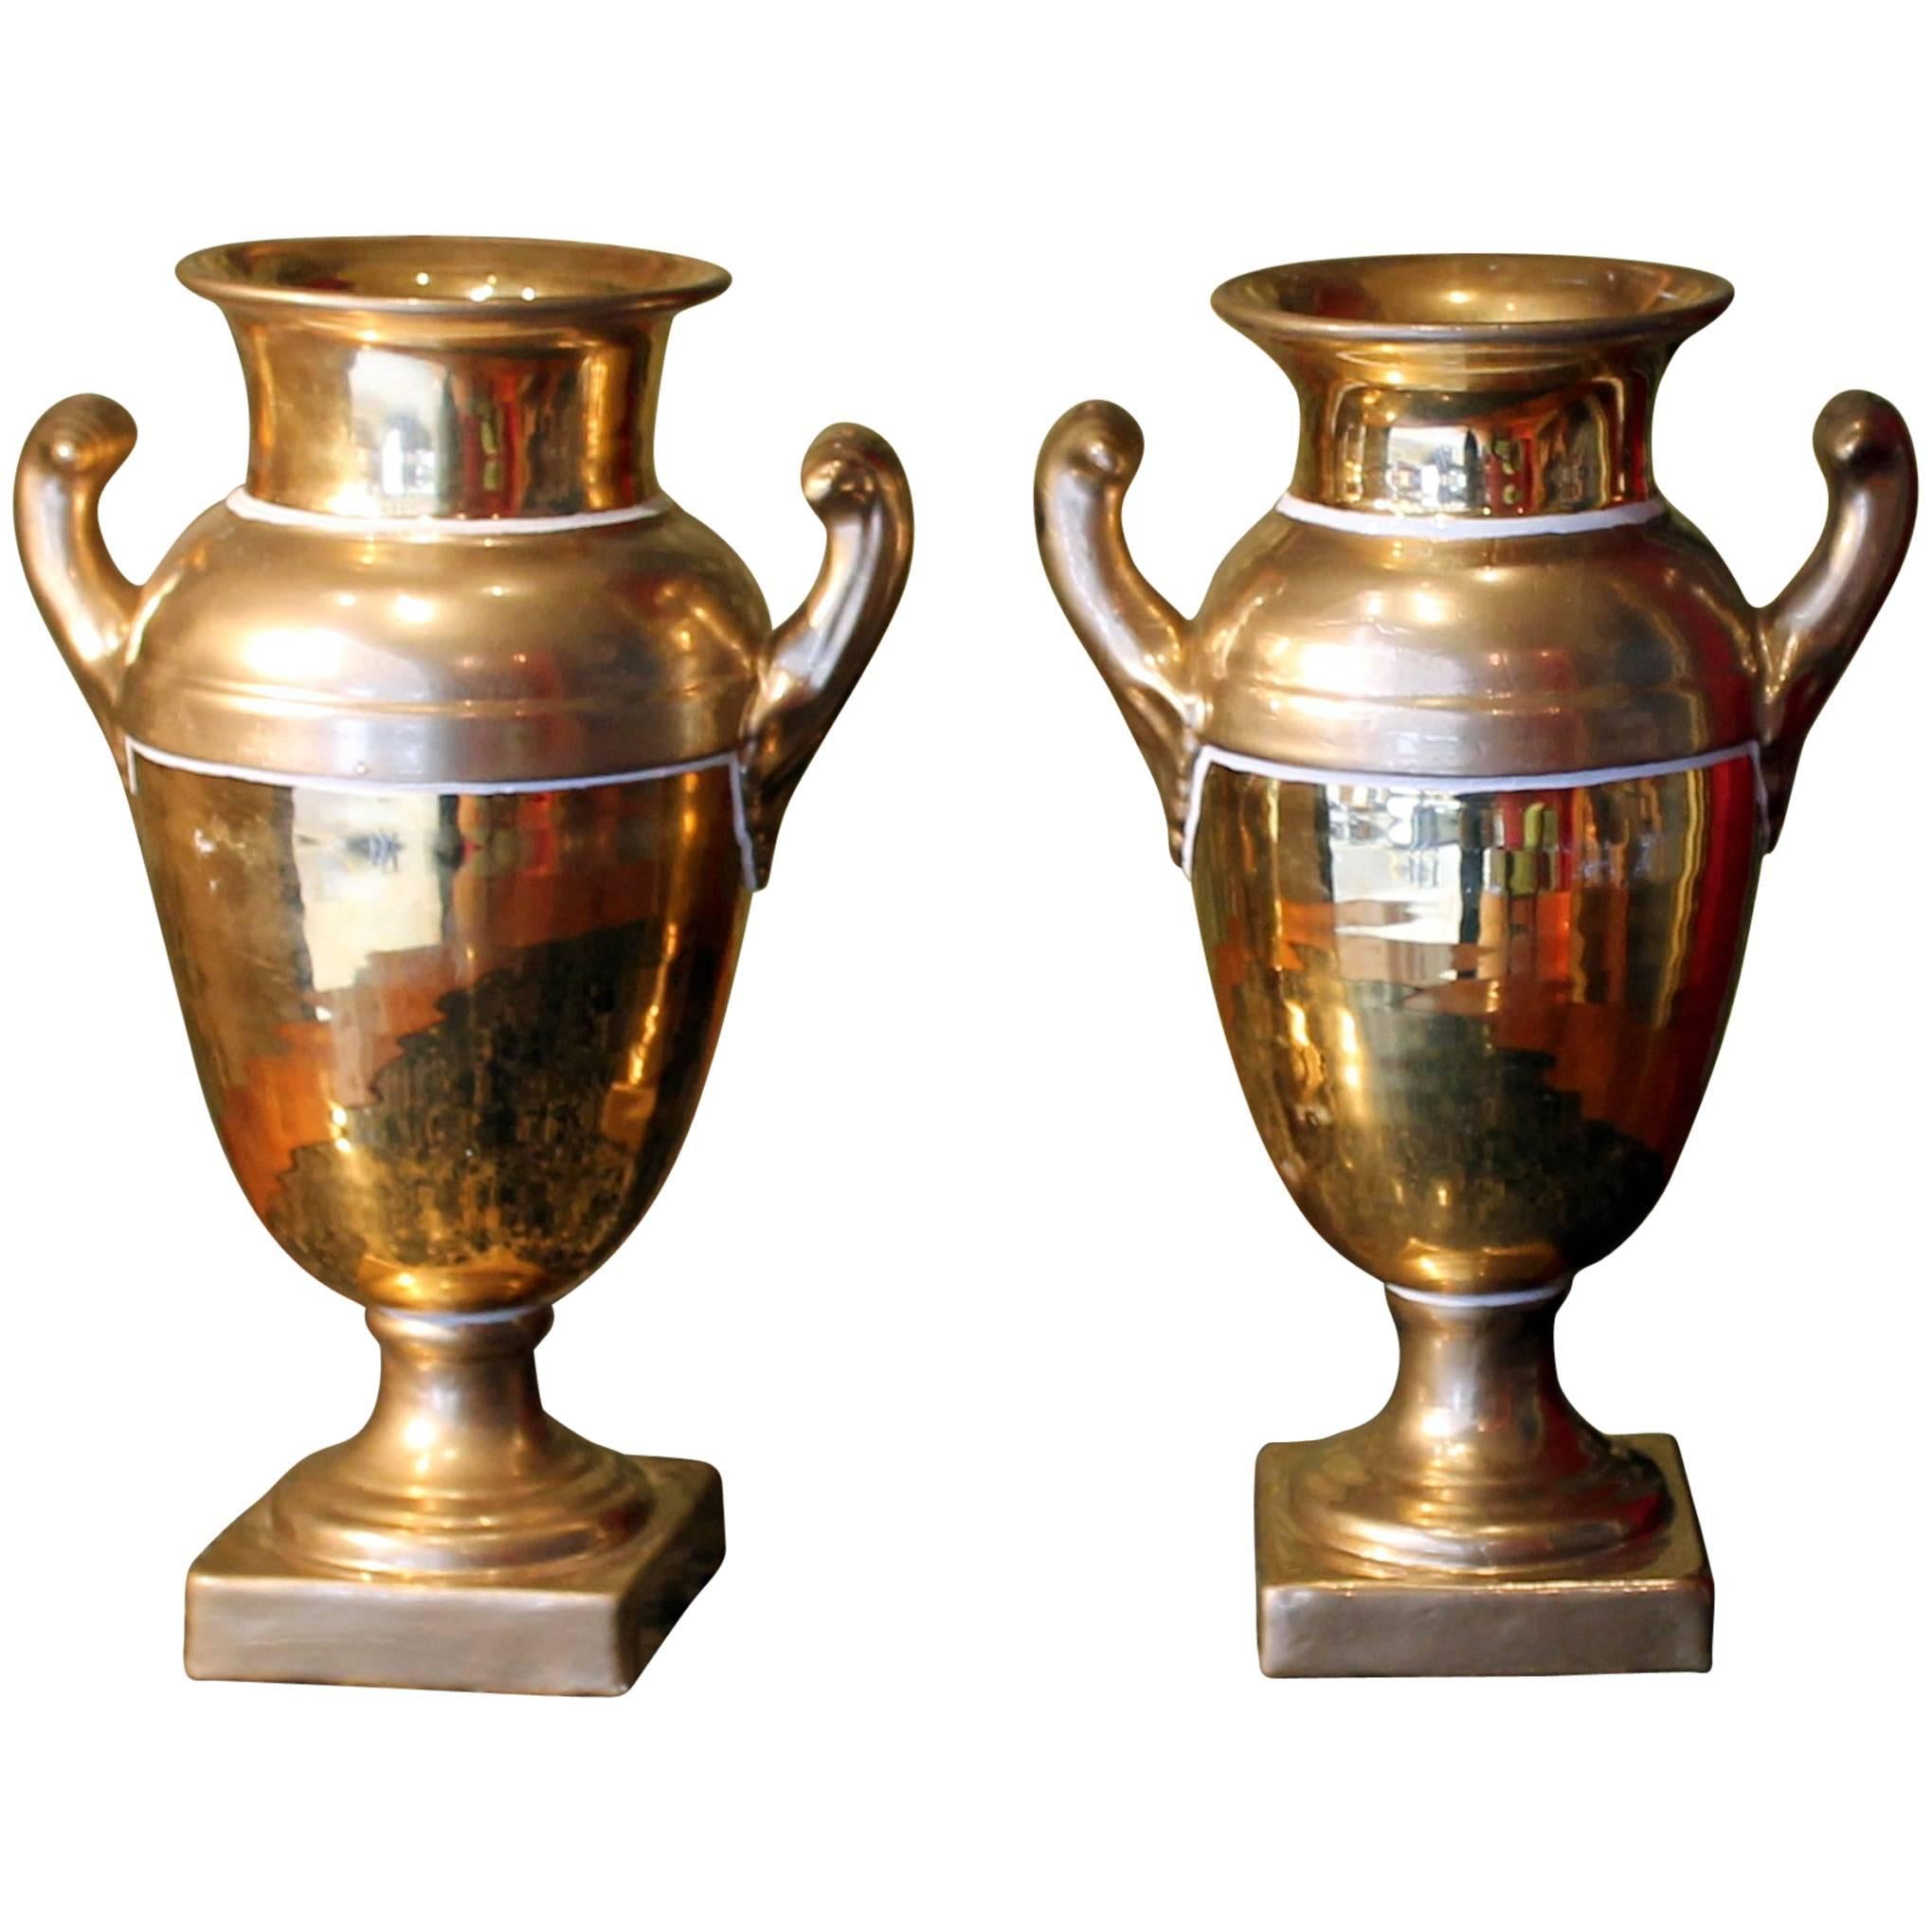 Pair of French Empire Period Matte and Burnished Gilt Porcelain Vases